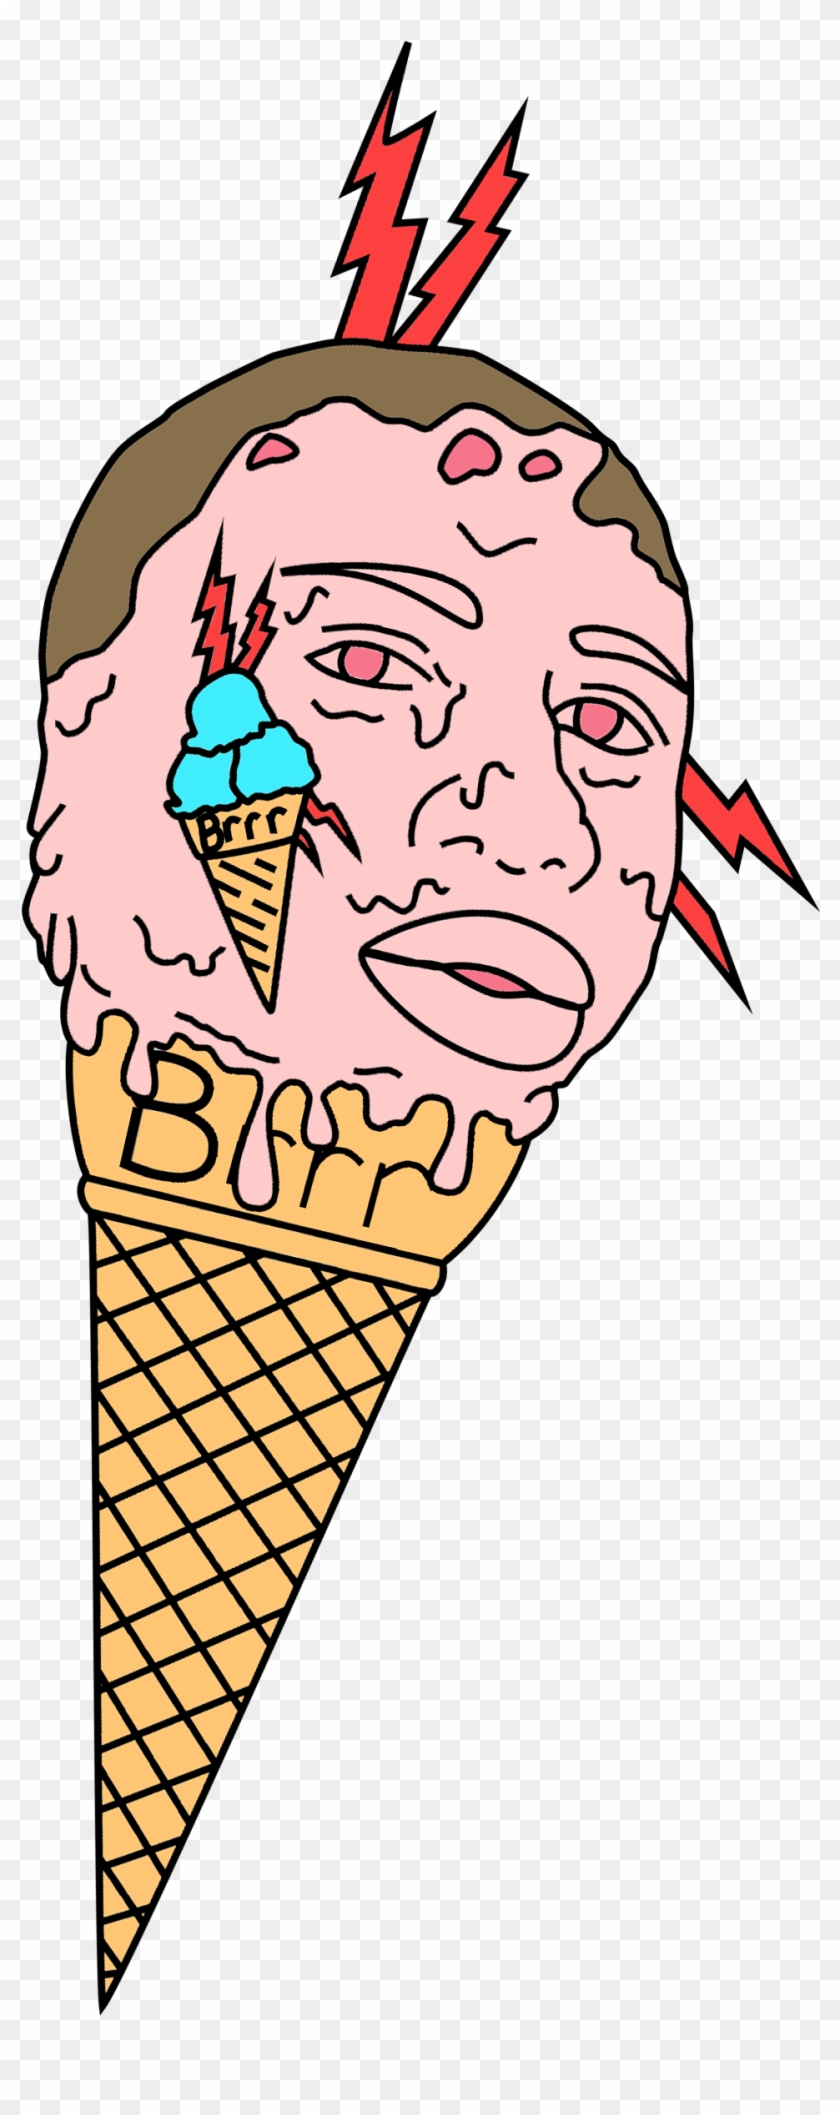 Ice Cream Cones Drawing Rapper Hd Png Download 959x2369 Pngfind